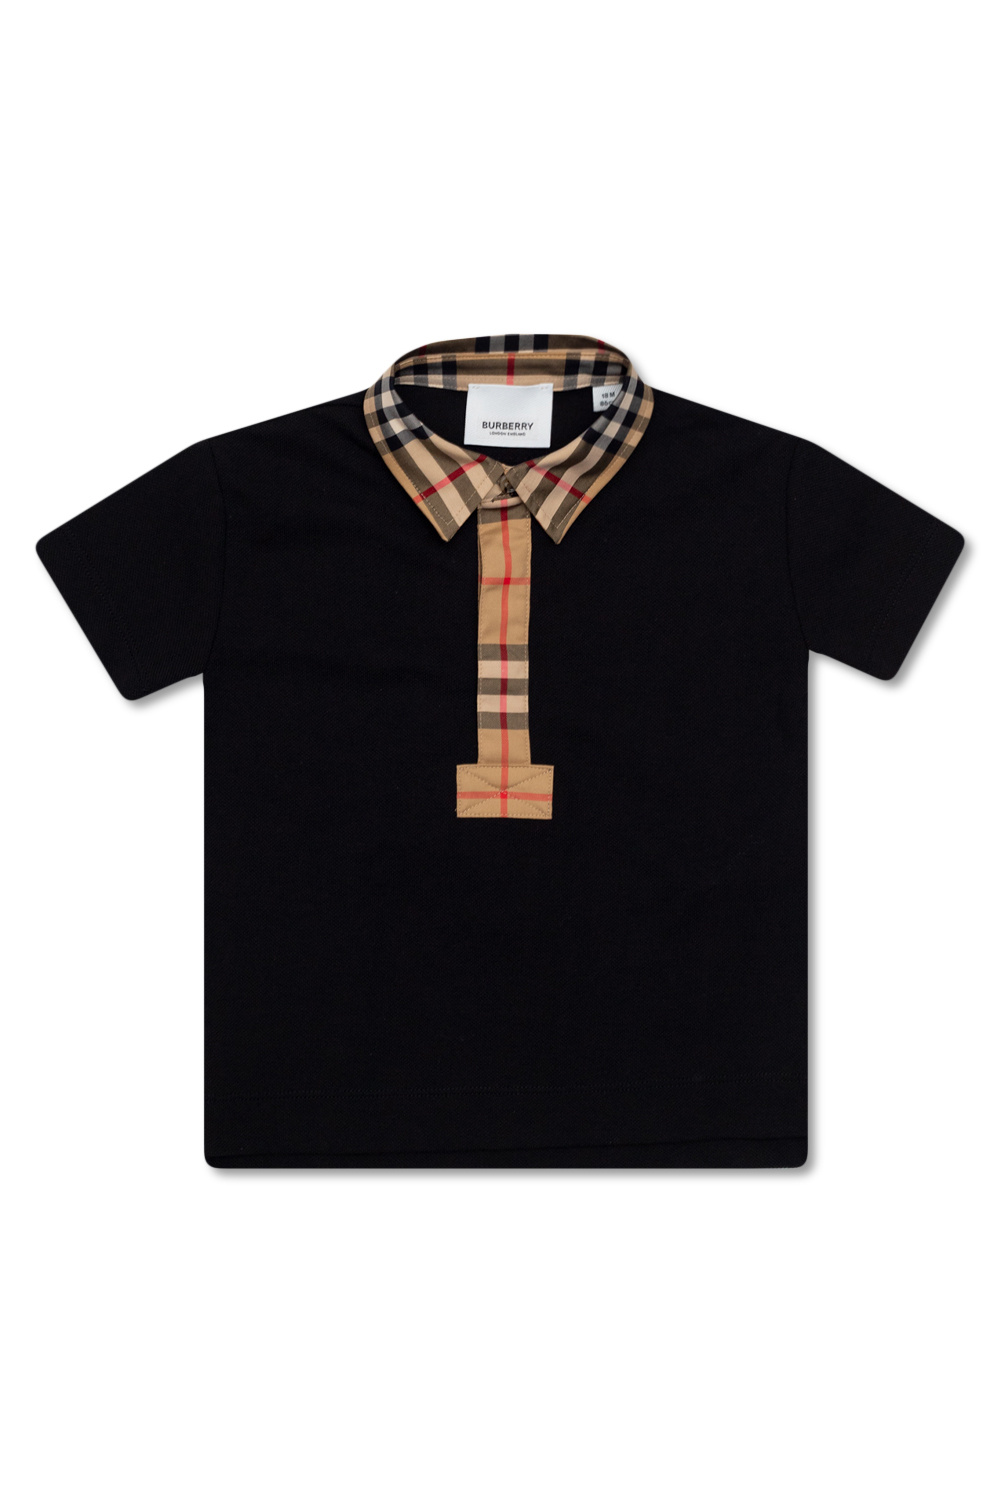 Burberry Kids ‘Johane’ Pullover polo shirt with short sleeves